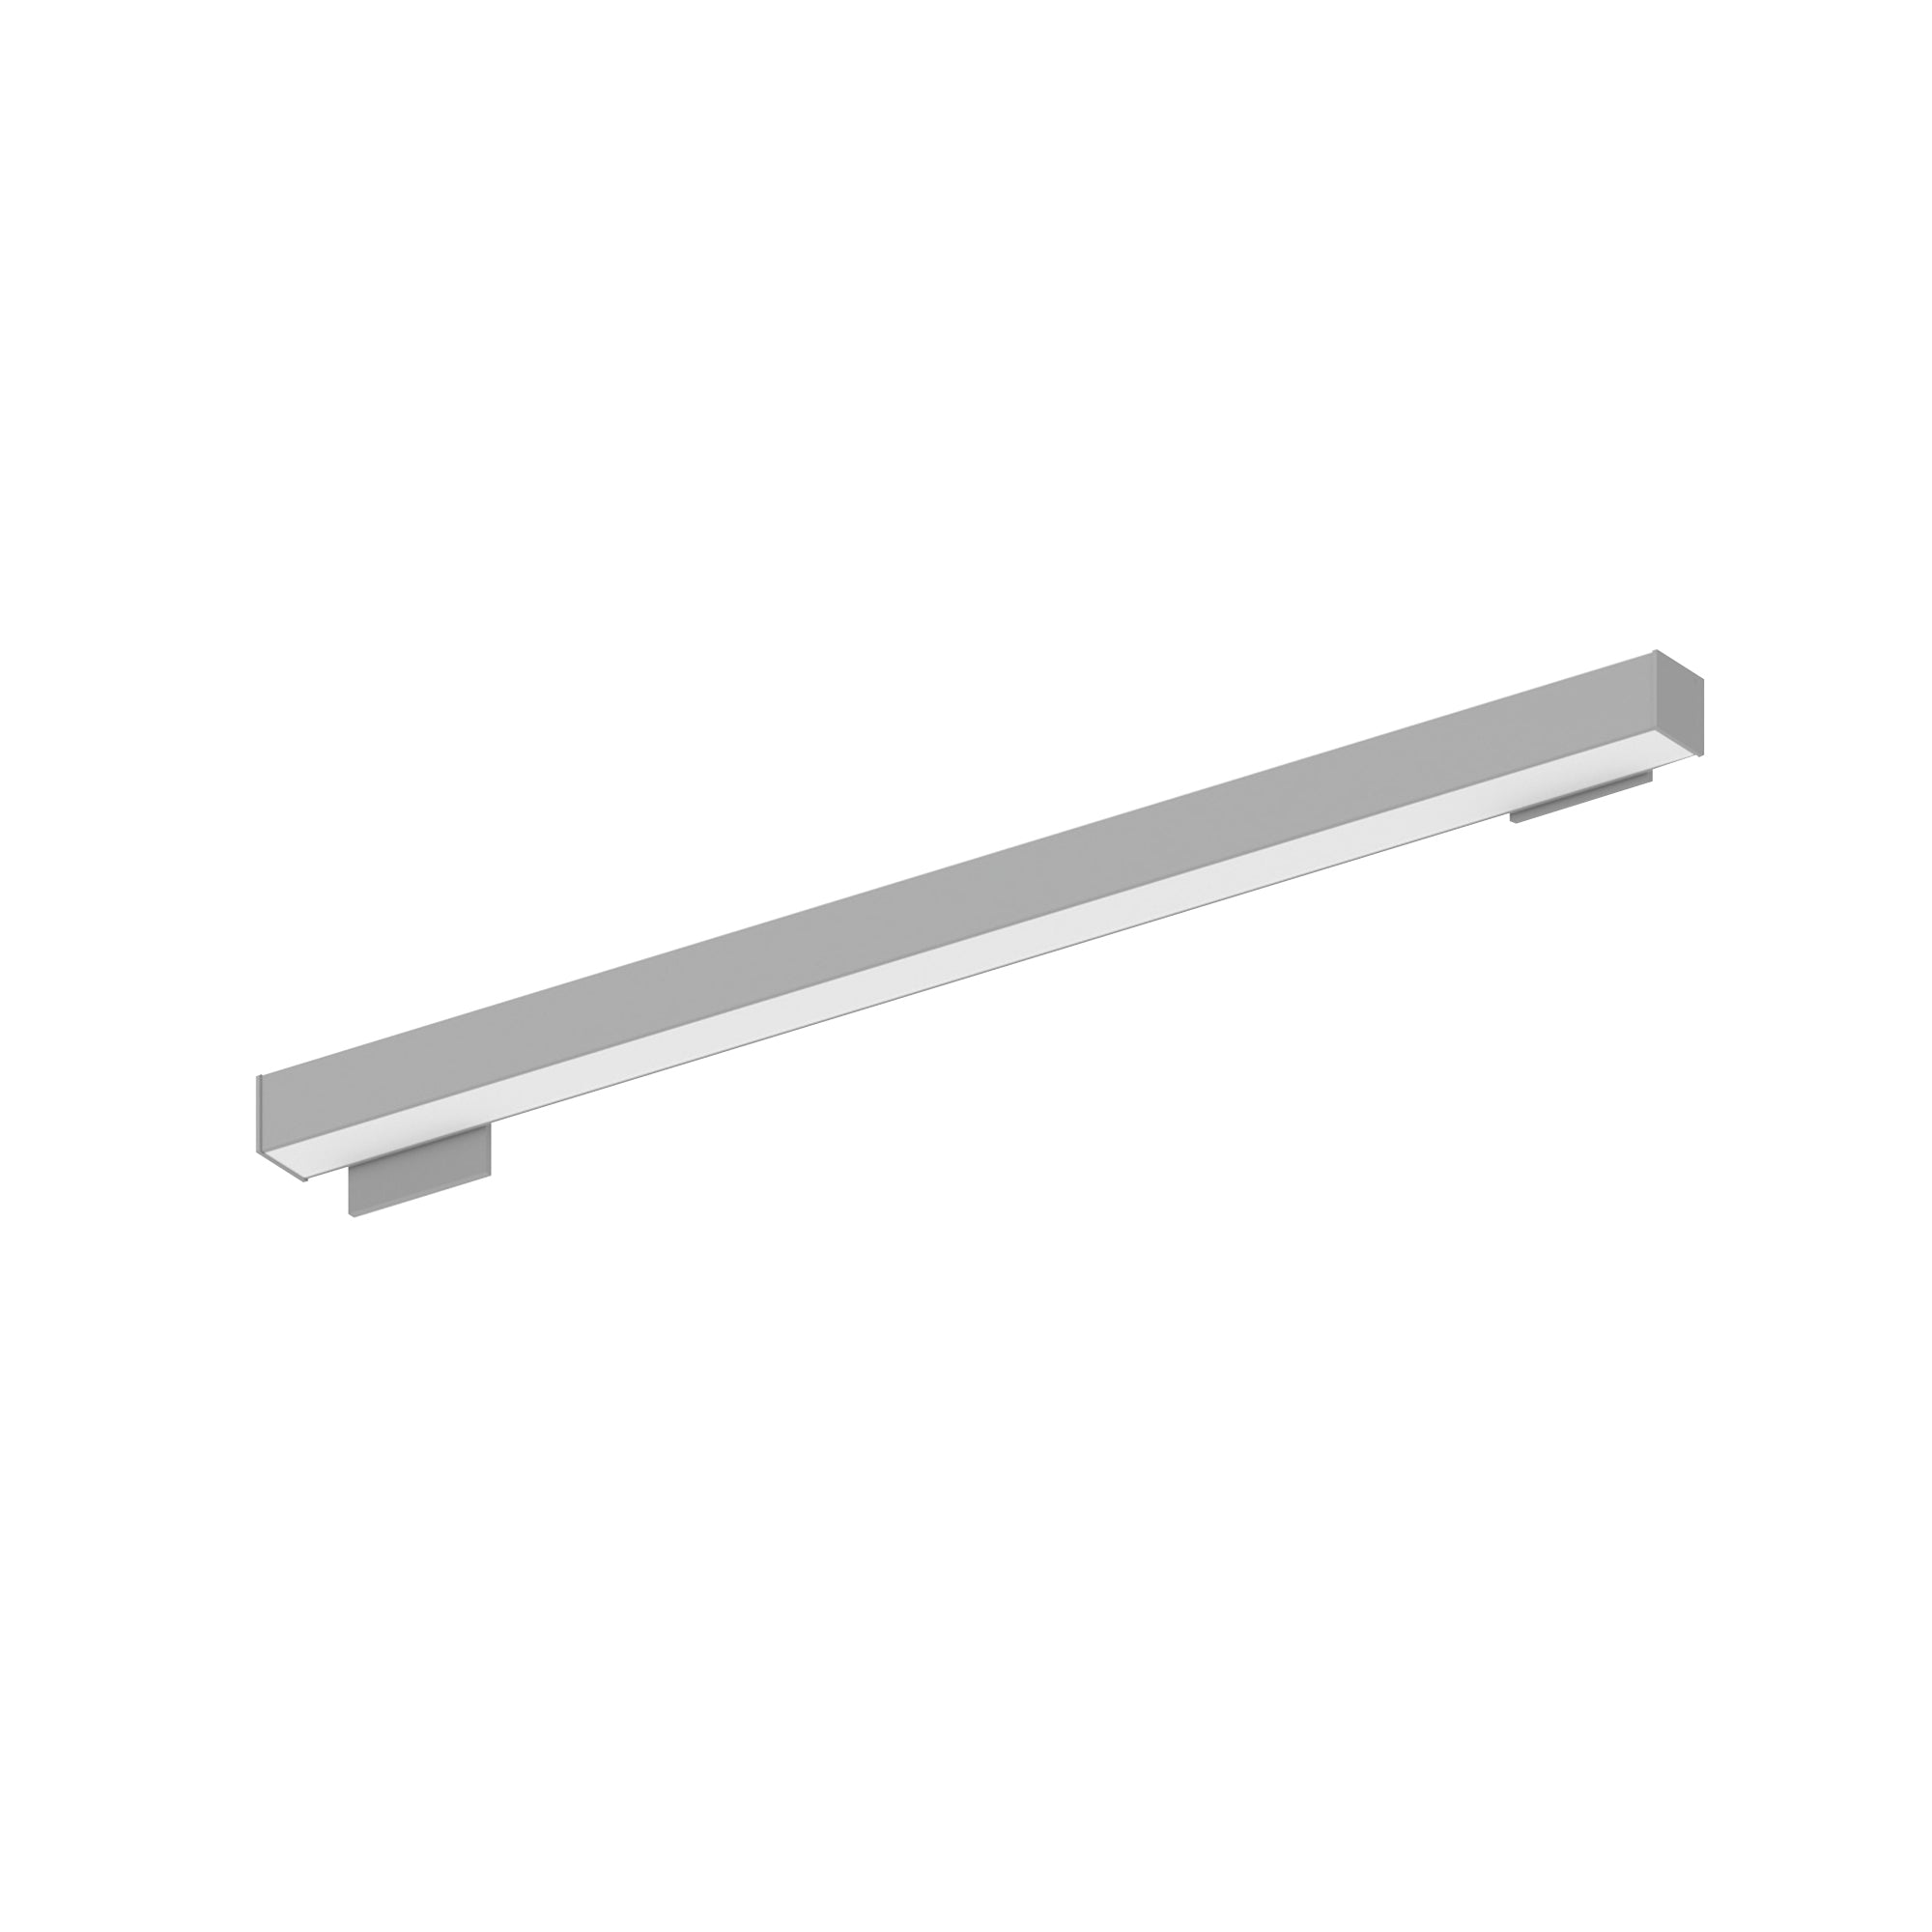 Nora Lighting NWLIN-41030A/L4-R2 - Linear - 4' L-Line LED Wall Mount Linear, 4200lm / 3000K, 4 Inchx4 Inch Left Plate & 2 Inchx4 Inch Right Plate, Aluminum Finish